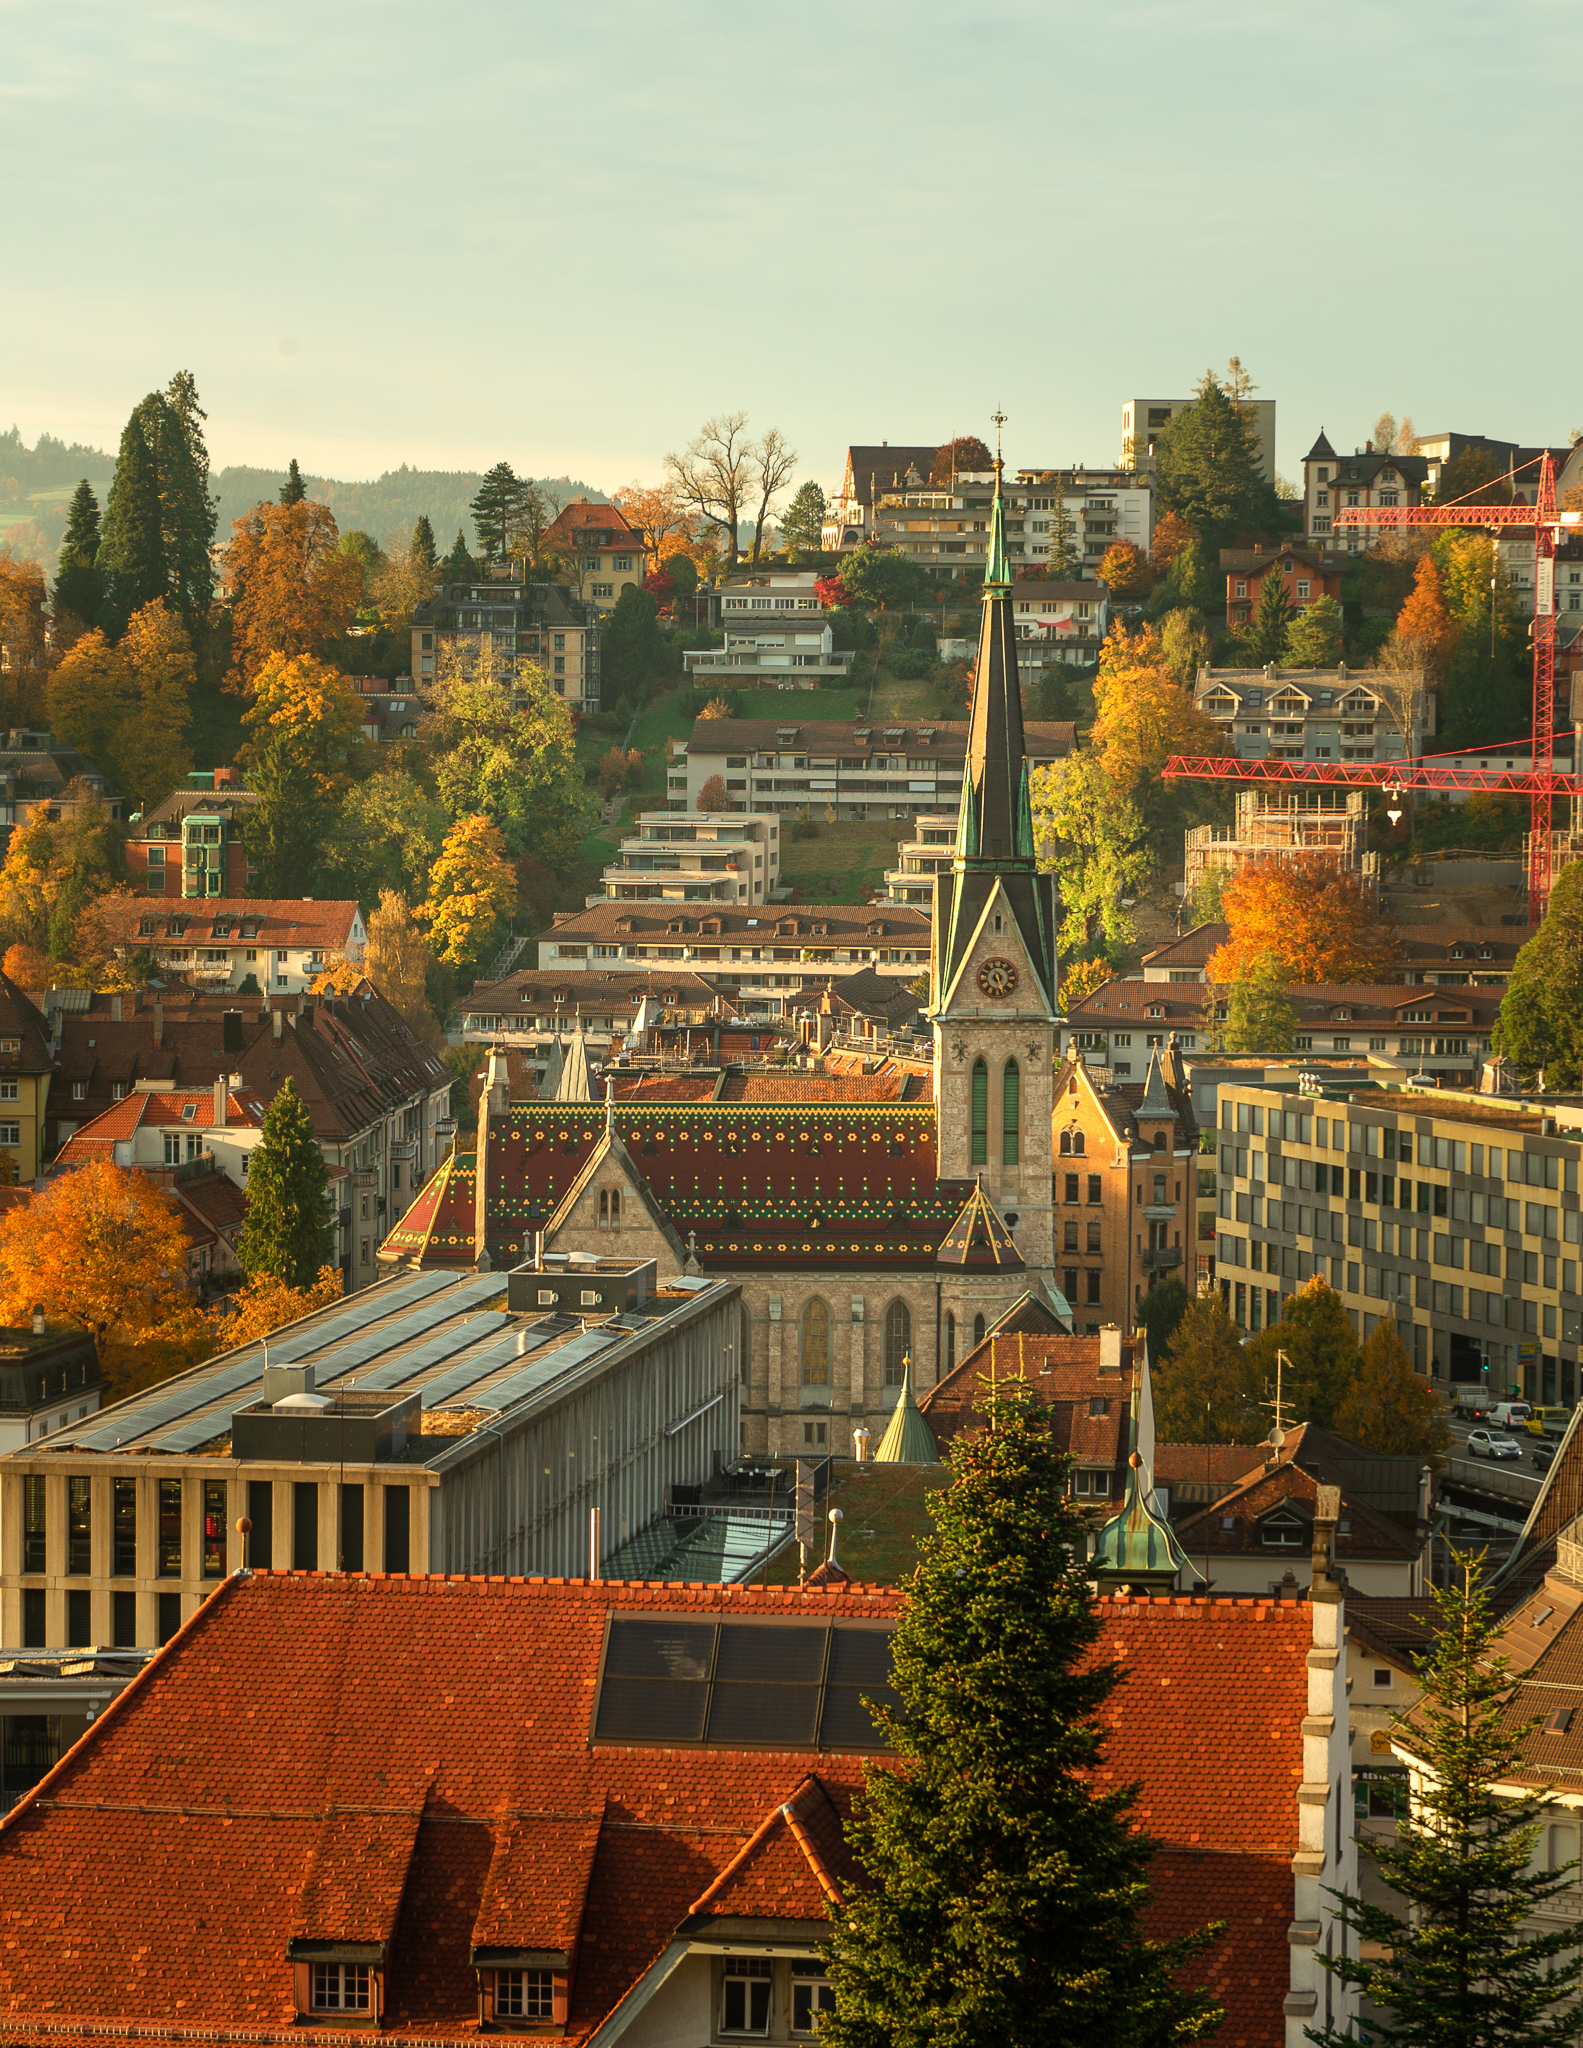 a view of St. Gallen church in autumn, with autumn leaves and colors in the background